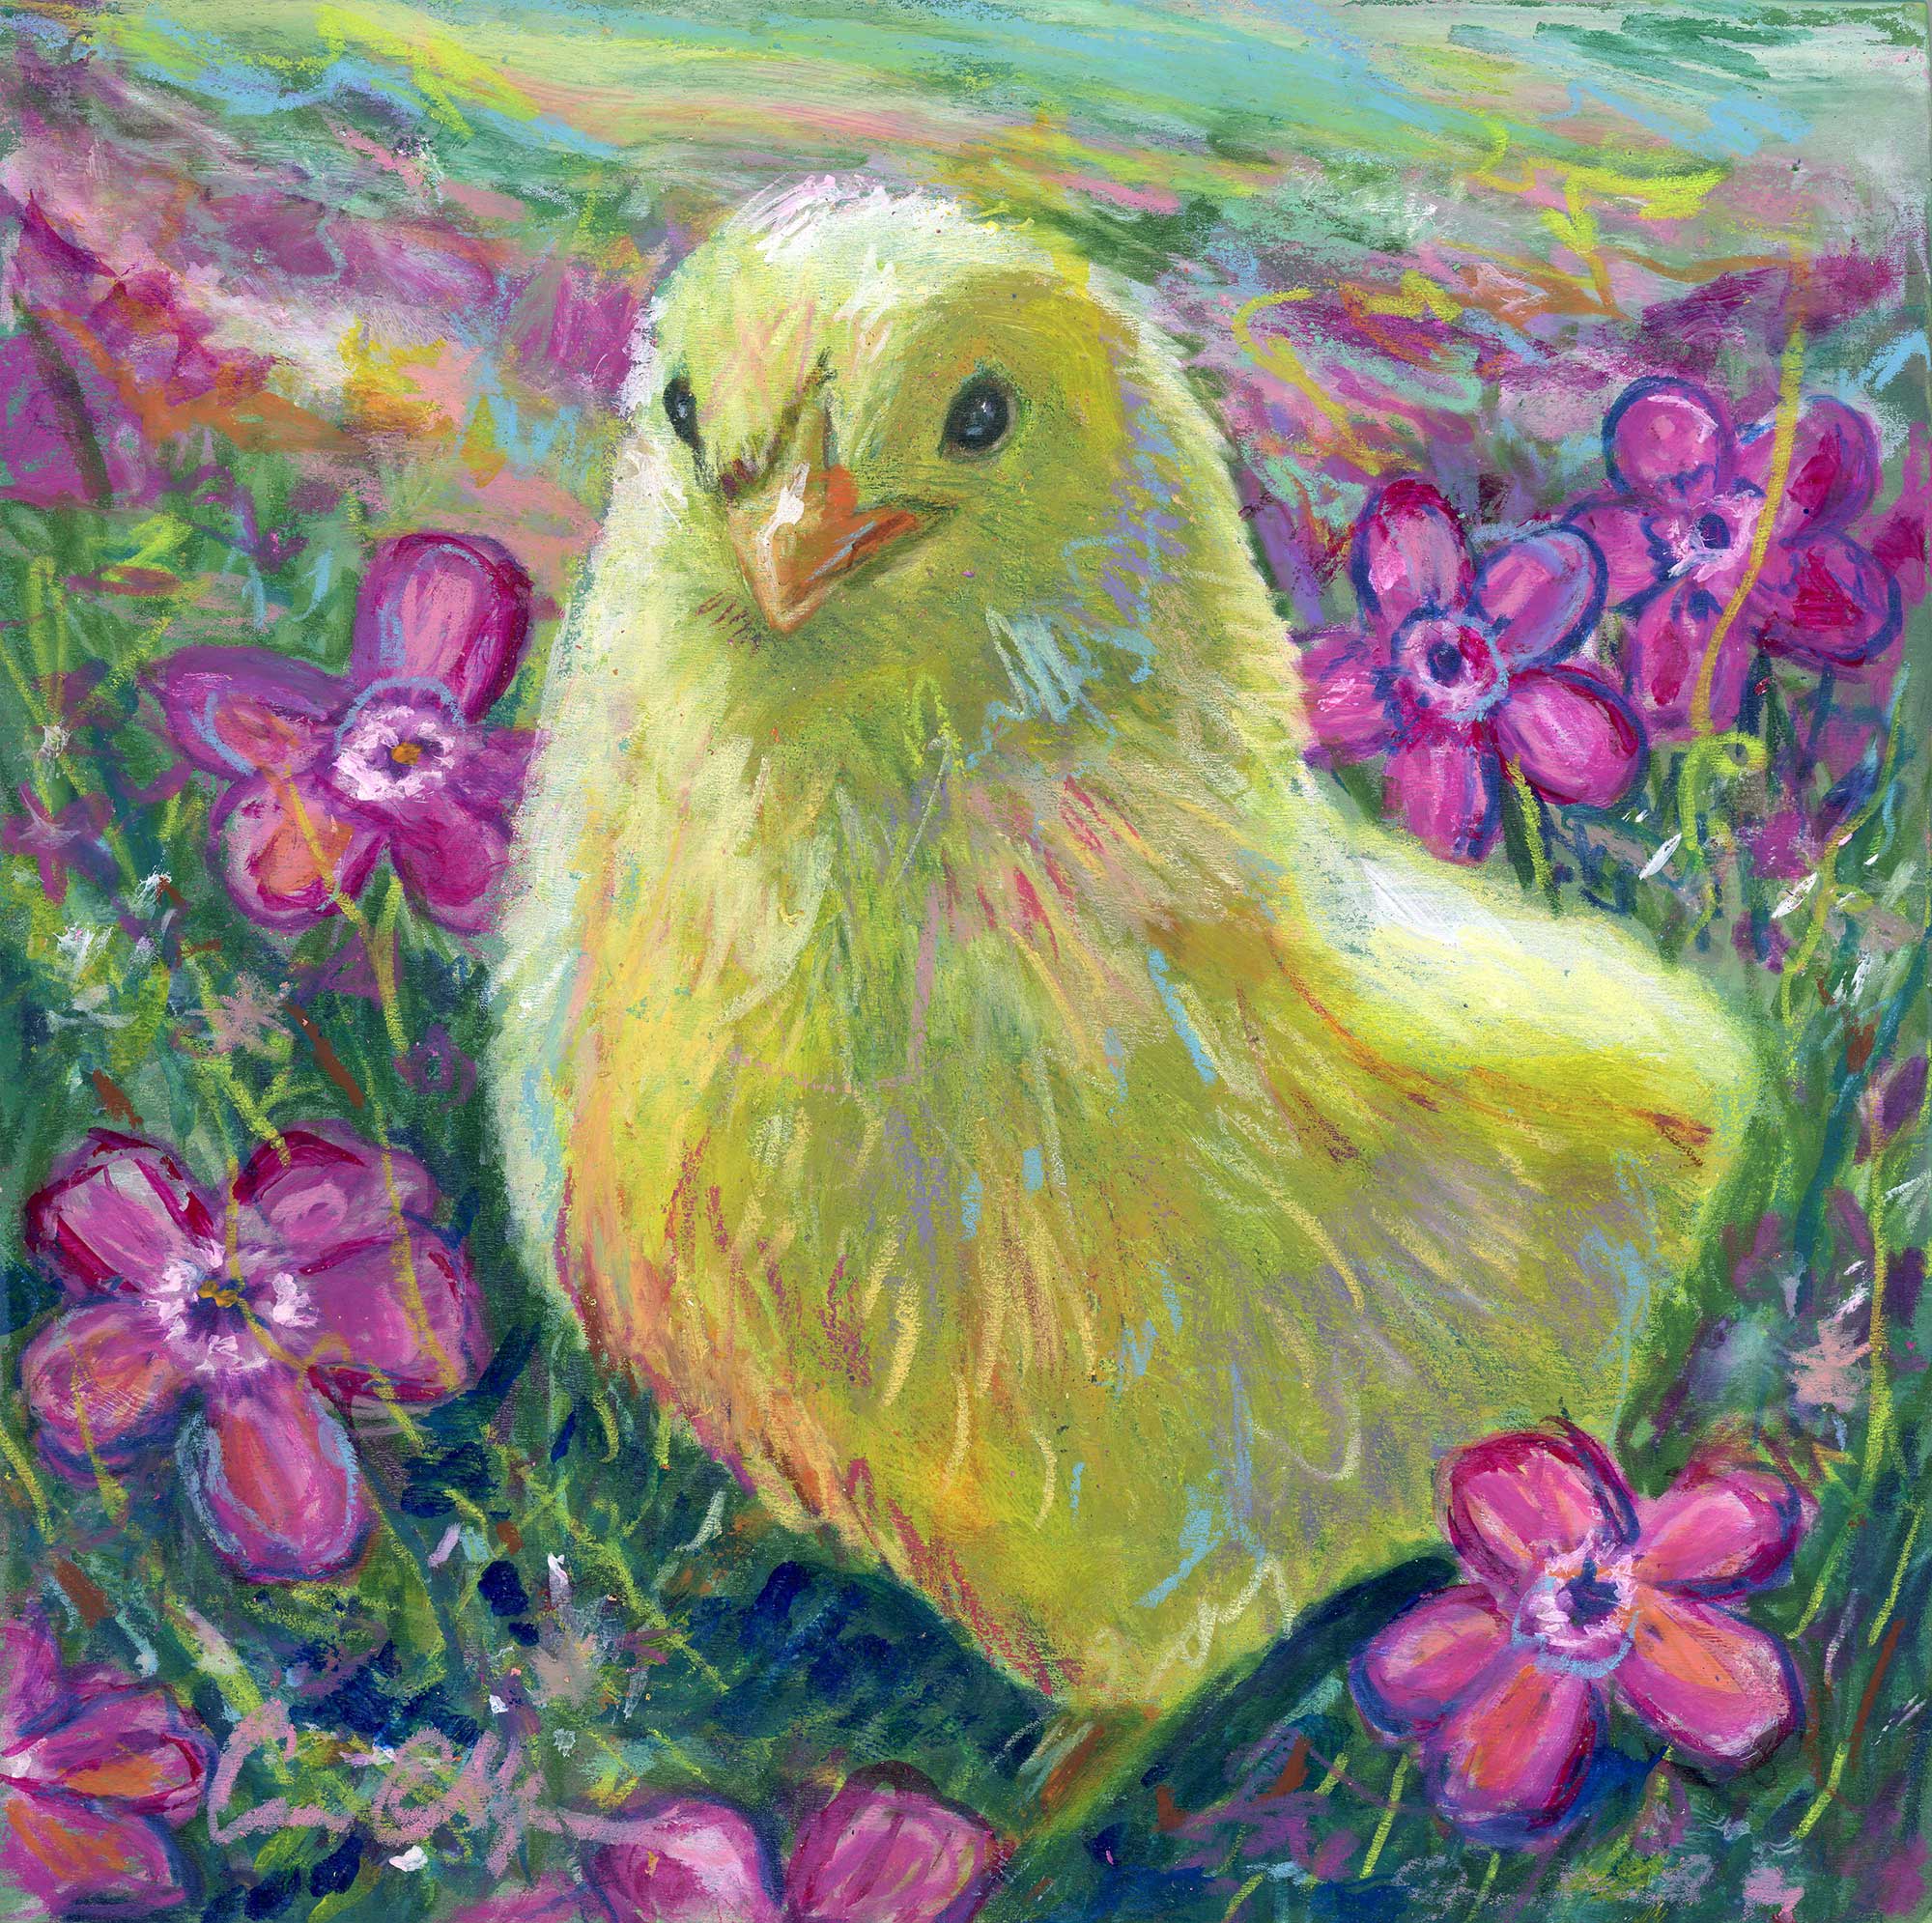 SOLD - "Flower Chick", 6" x 6", mixed media